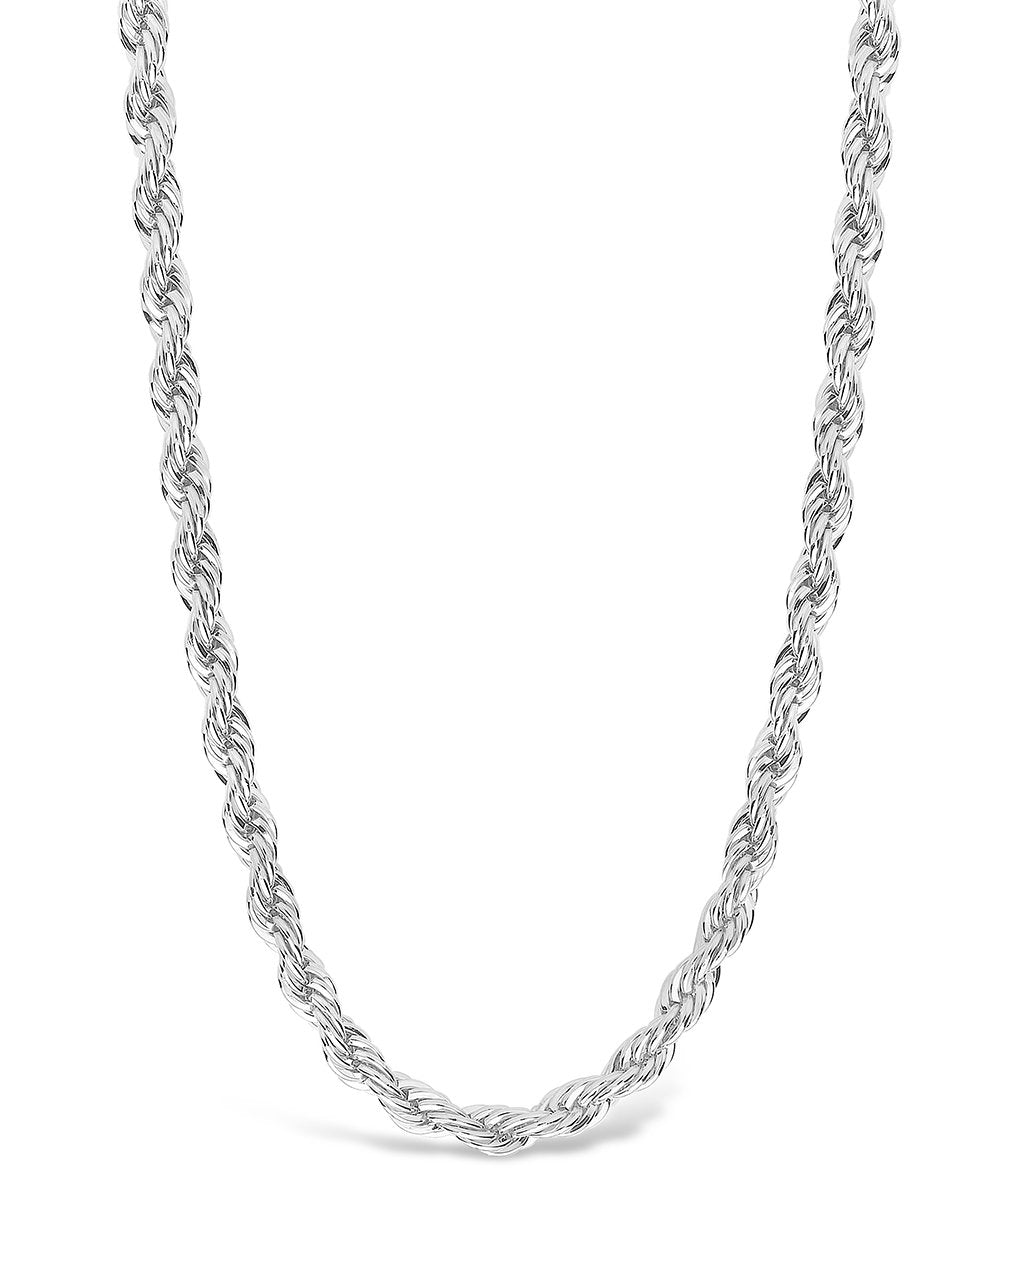 Rope Twist Chain Necklace Sterling Forever Silver 